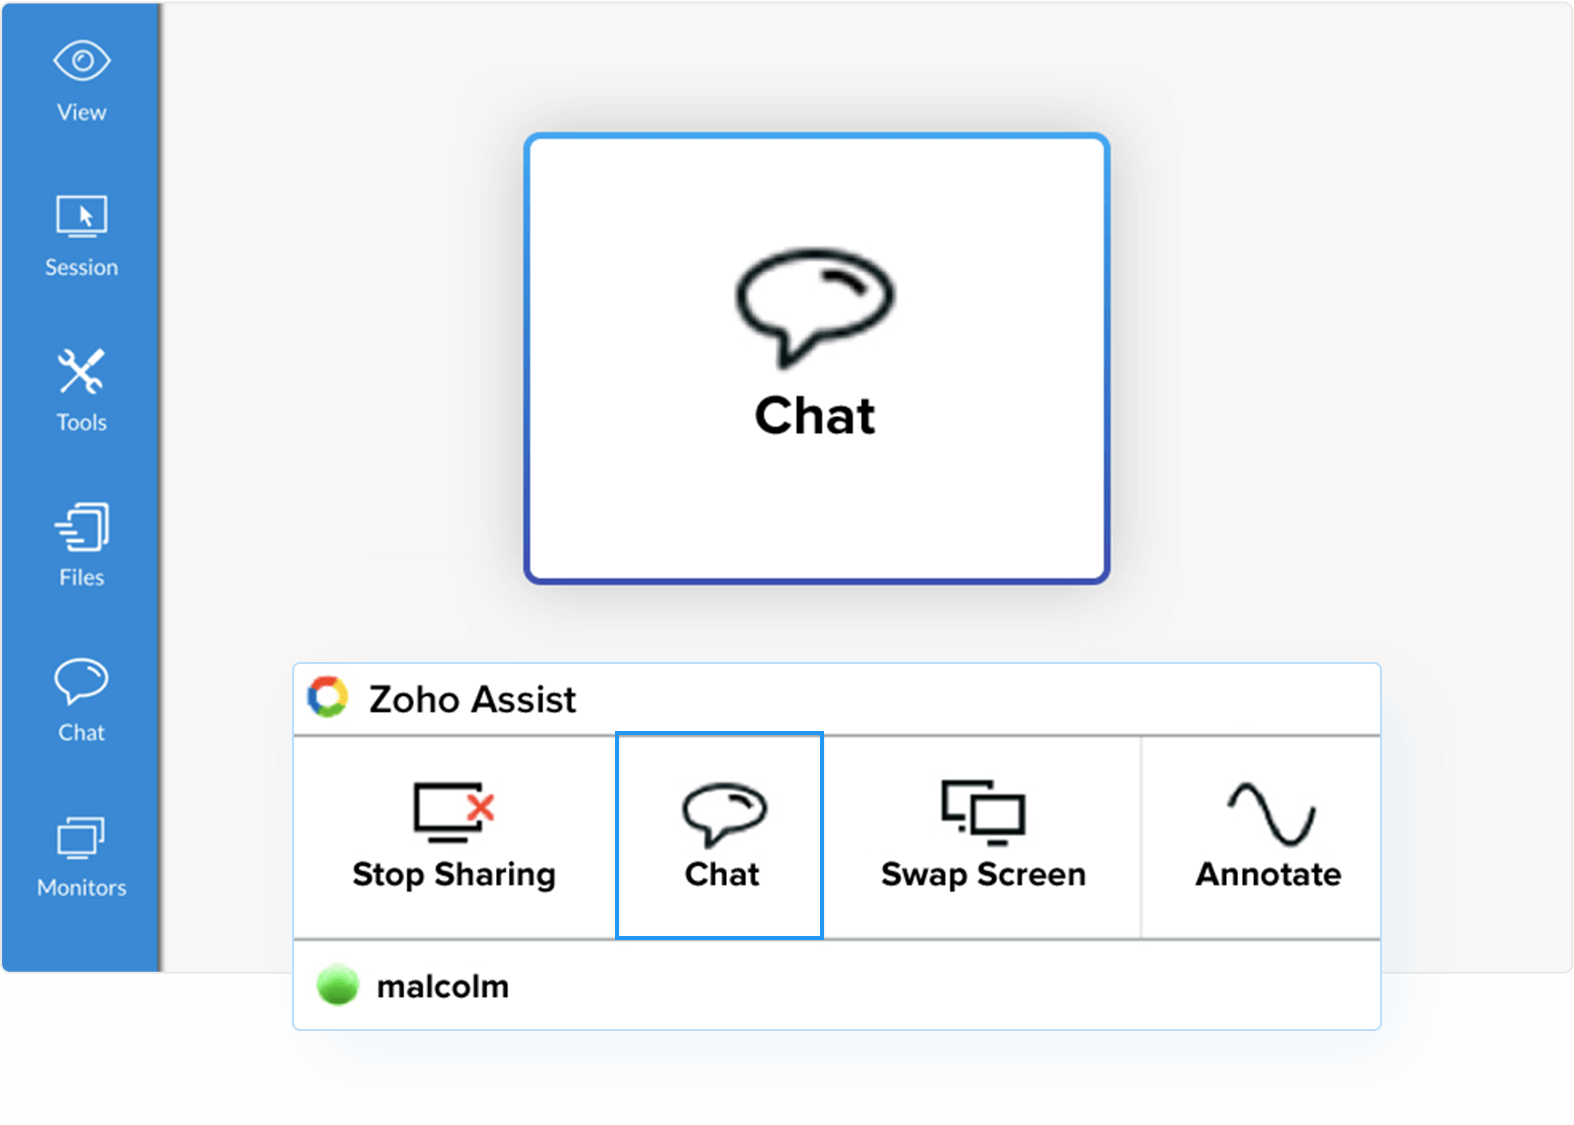 Chat instantly in Mac remote desktop - Zoho Assist TITLE : Chat instantly in Mac remote desktop 